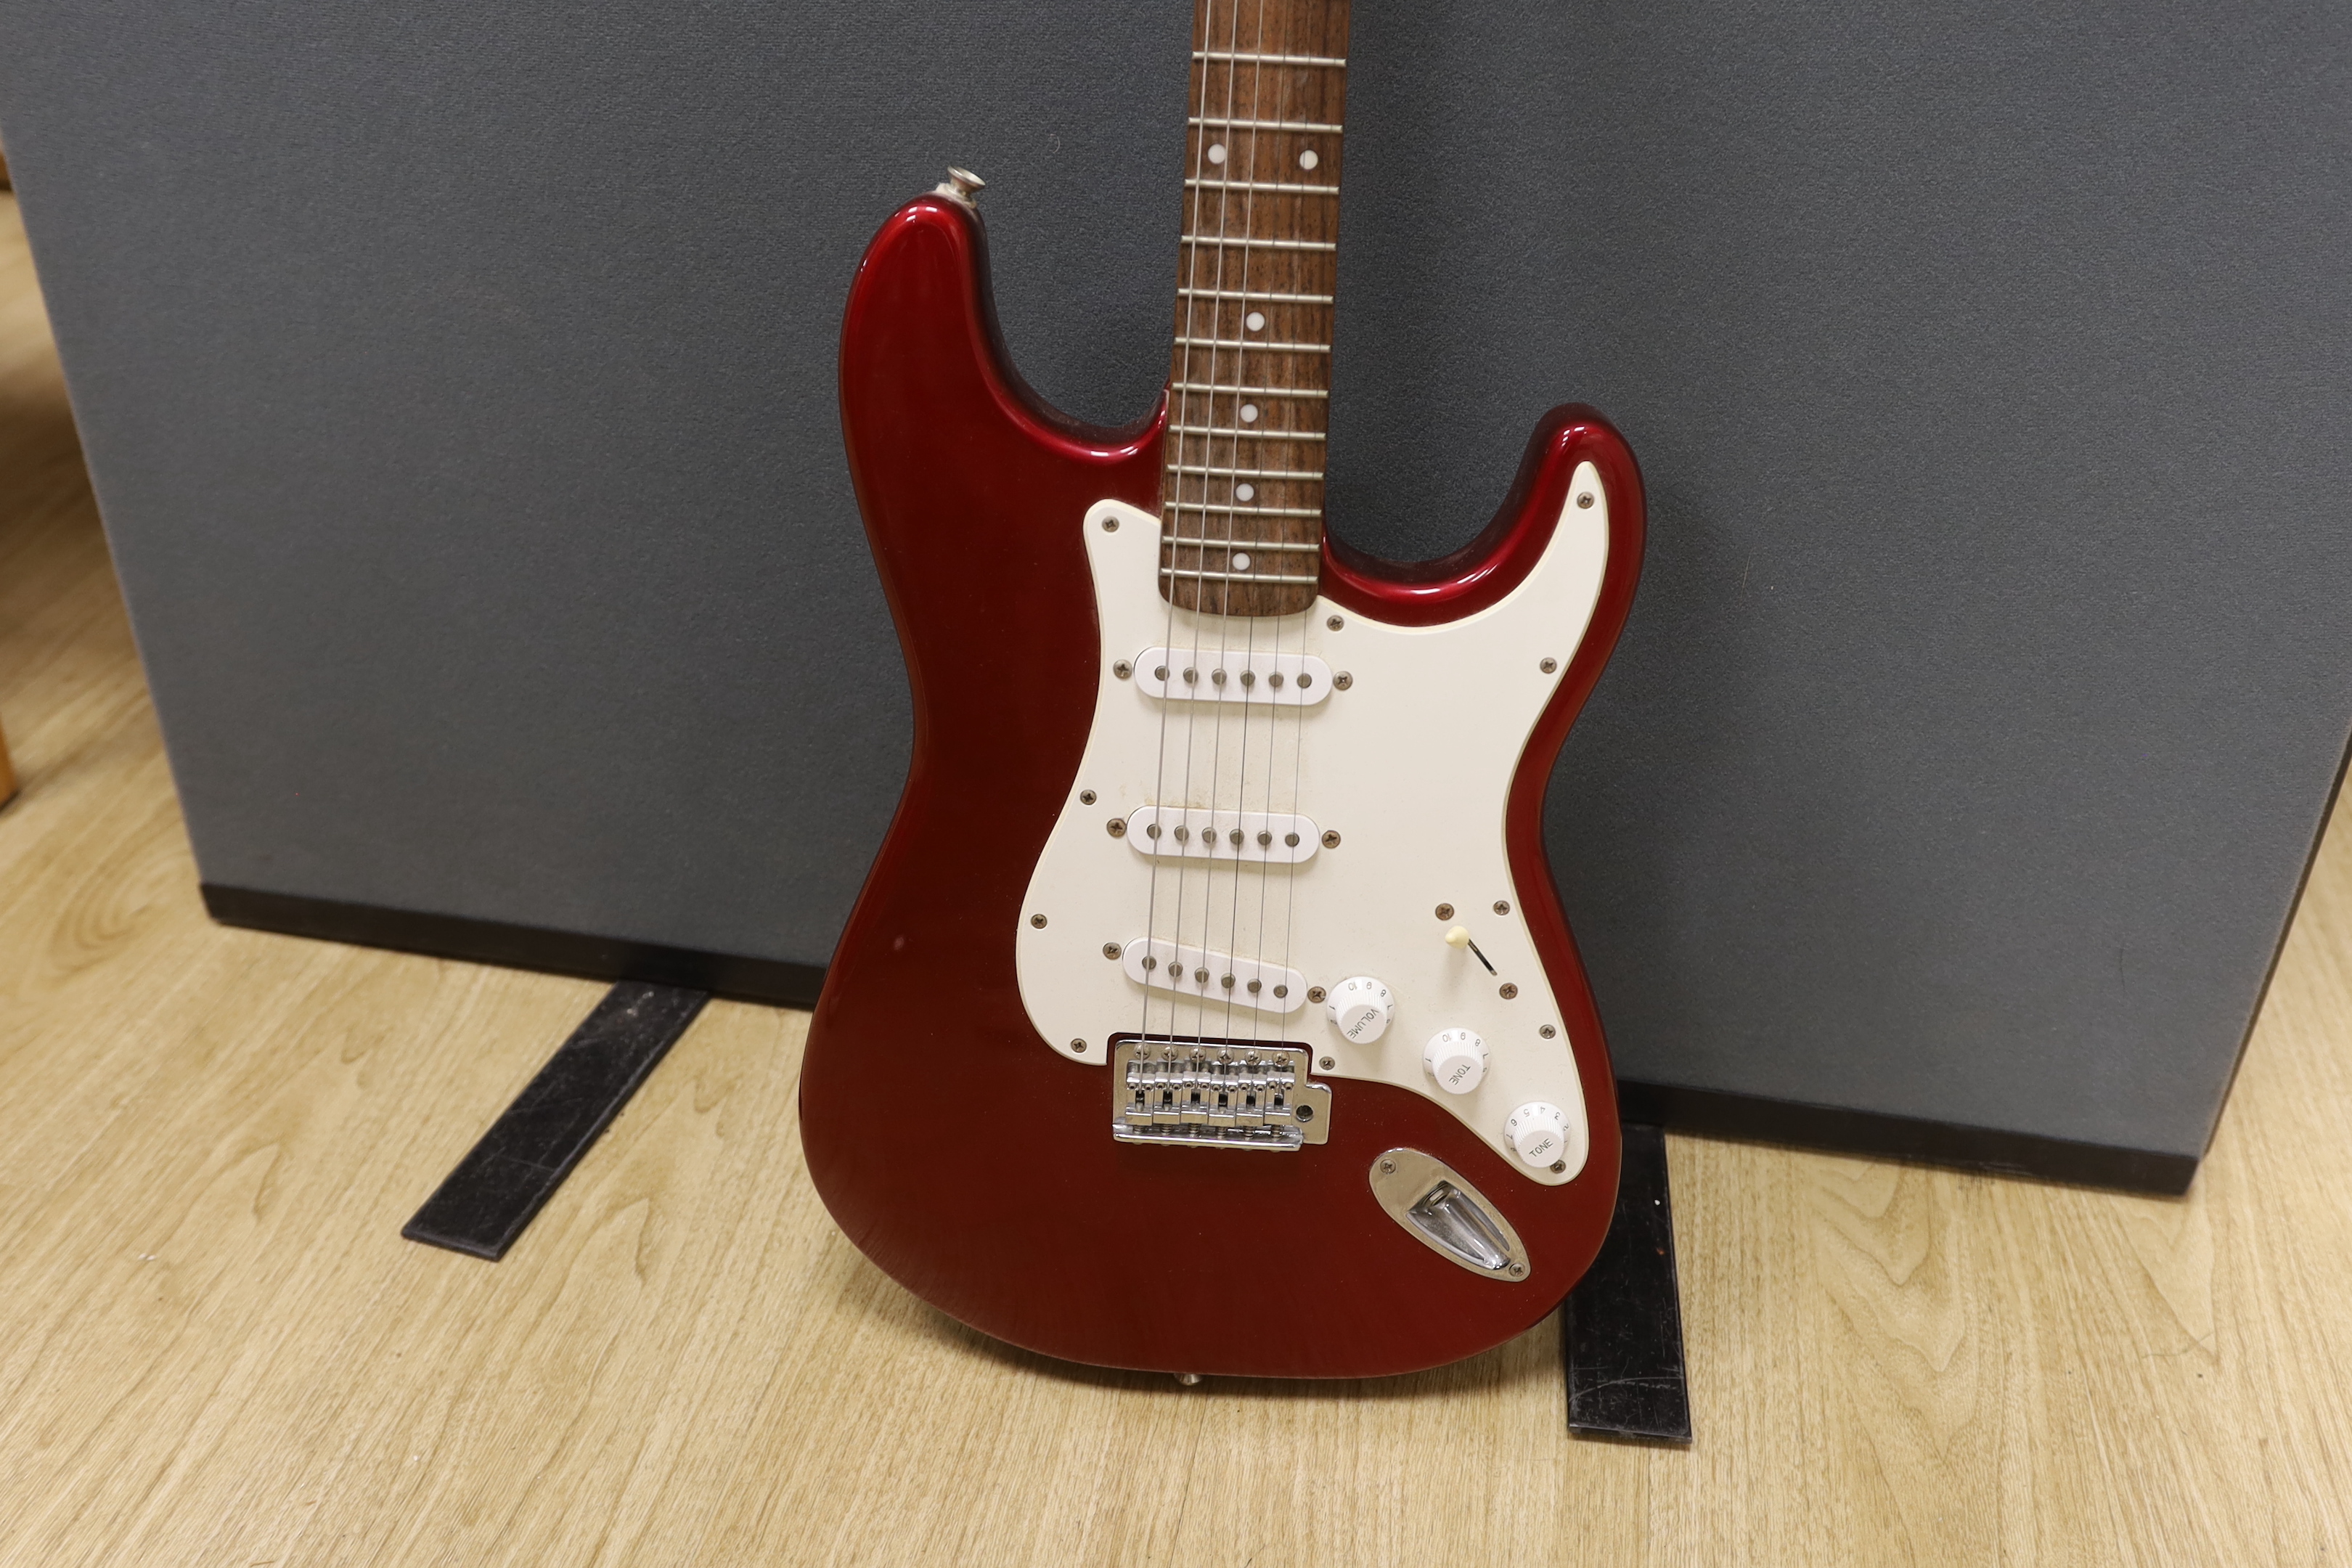 A Fender Squier Strat electric guitar with a soft case